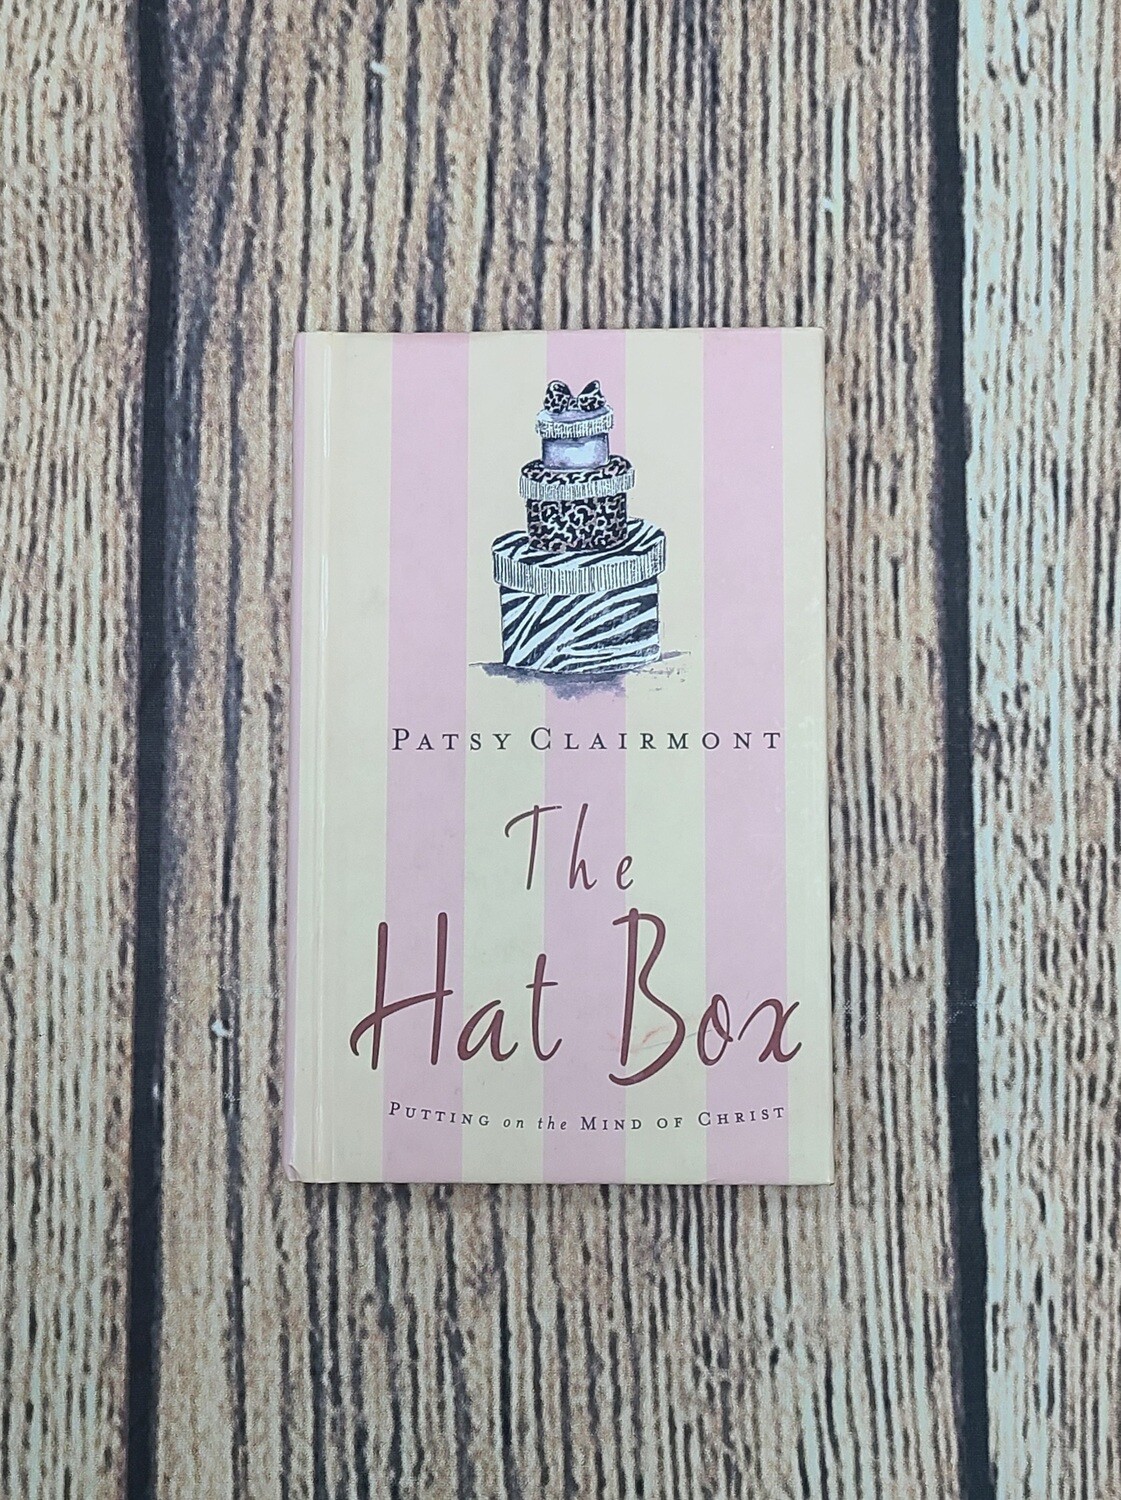 The Hat Box by Patsy Clairmont